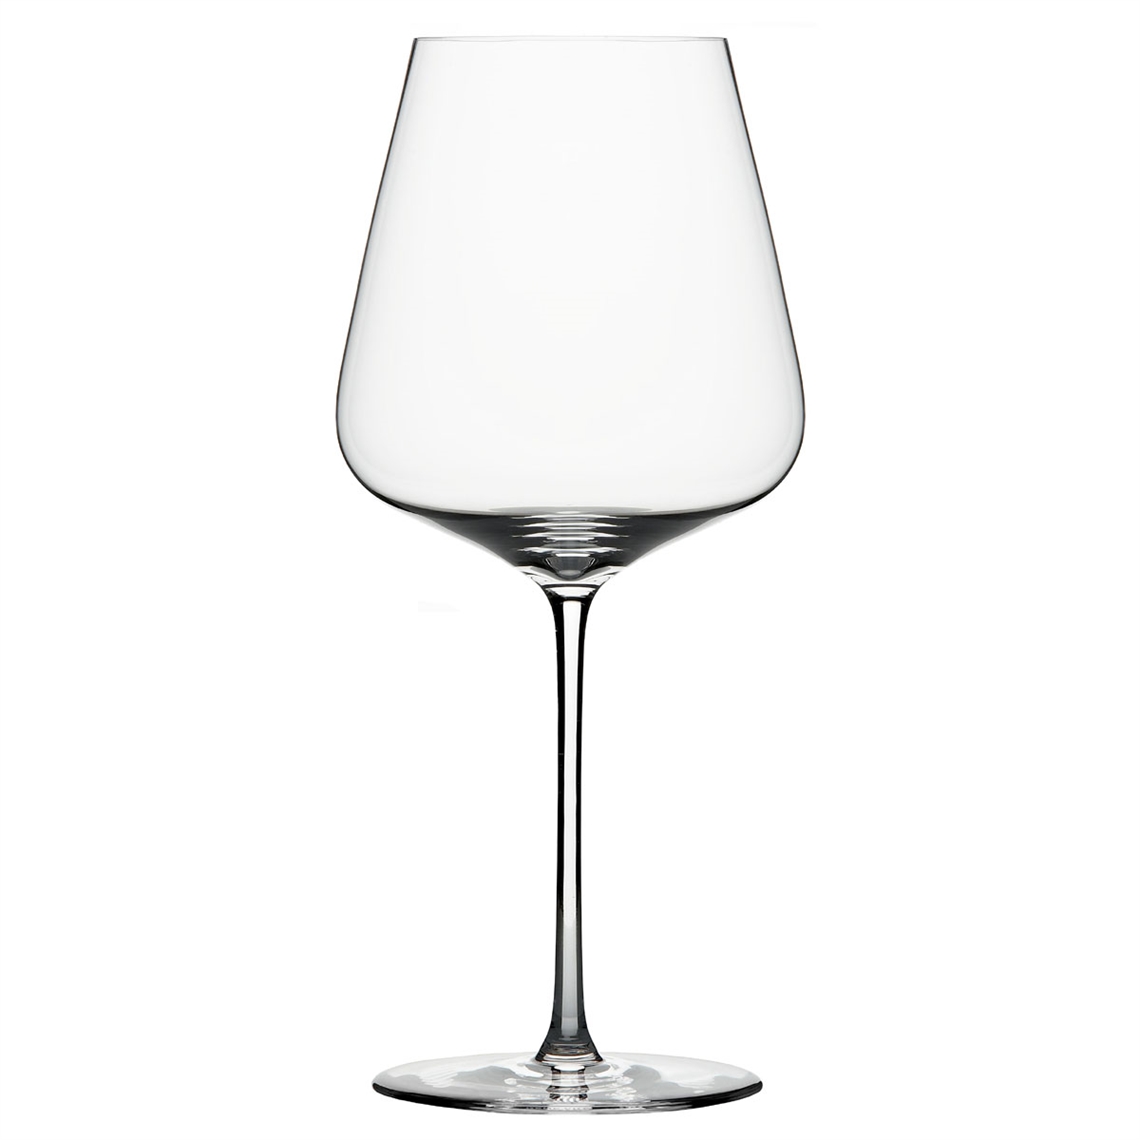 View more chablis wine glasses from our Premium Mouth Blown Glassware range